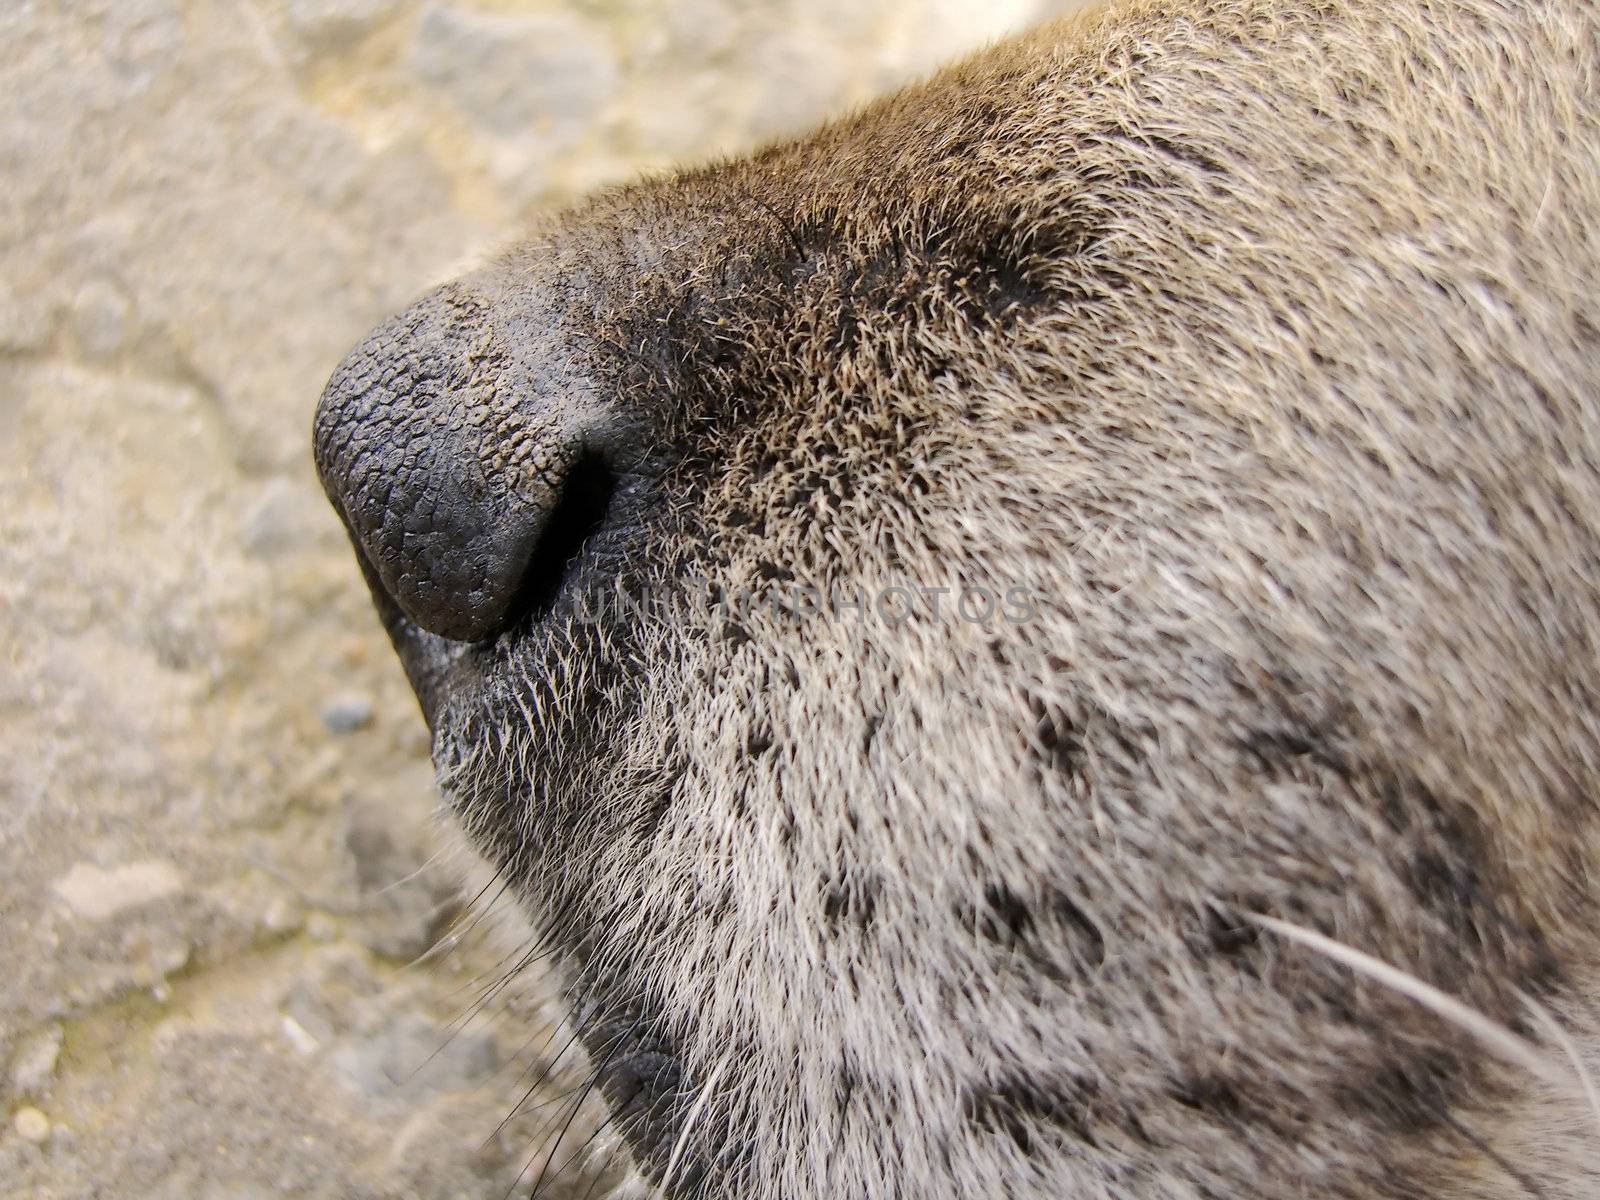 Closeup view of a nose of a domestic dog.